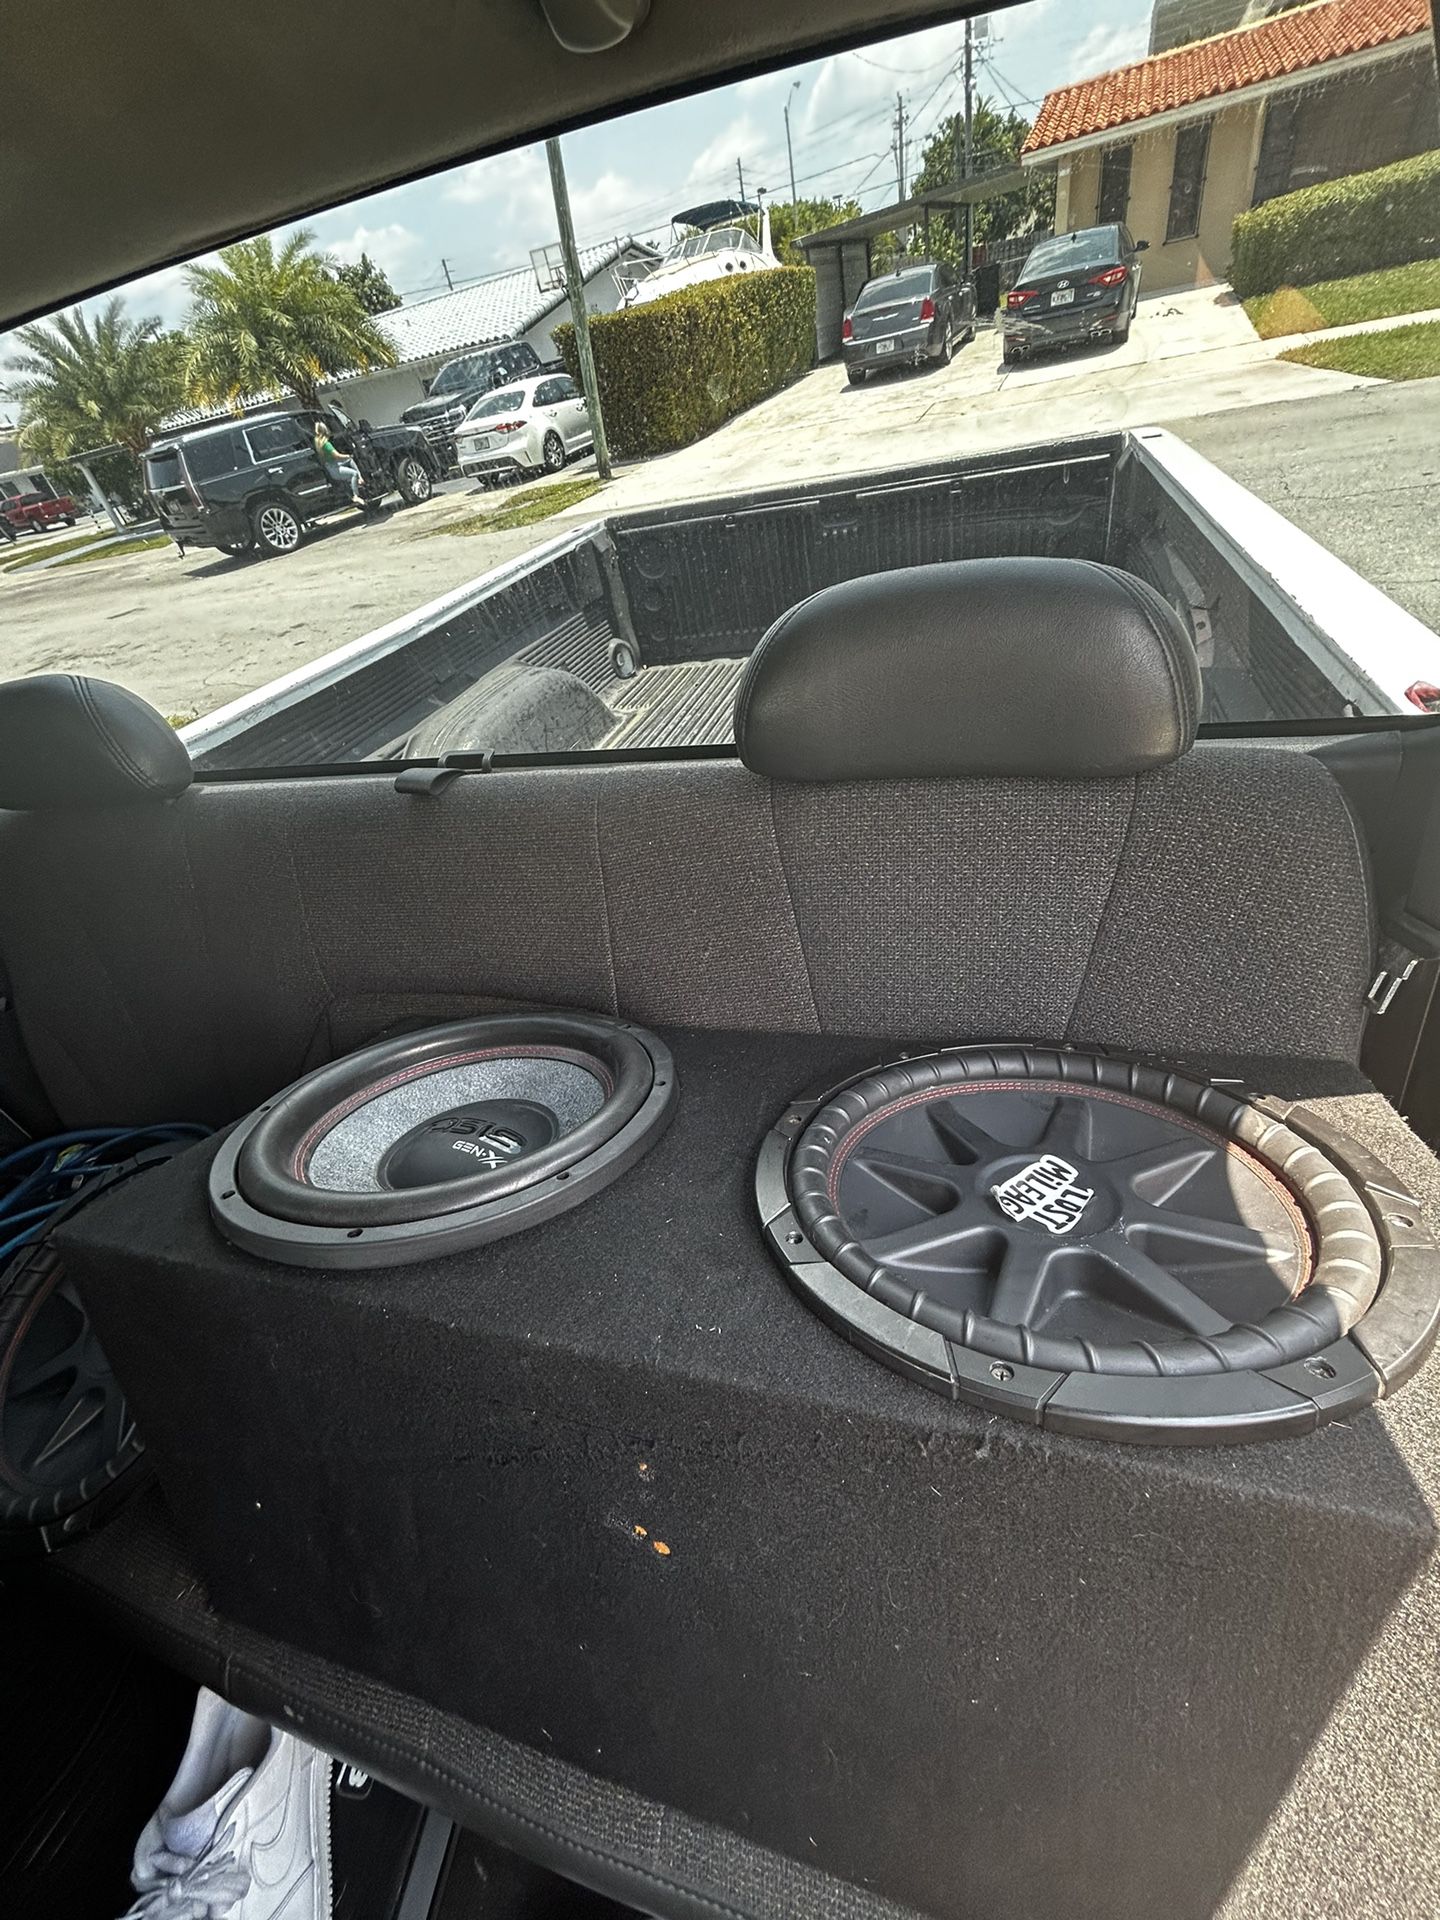 3 12” subwoofers